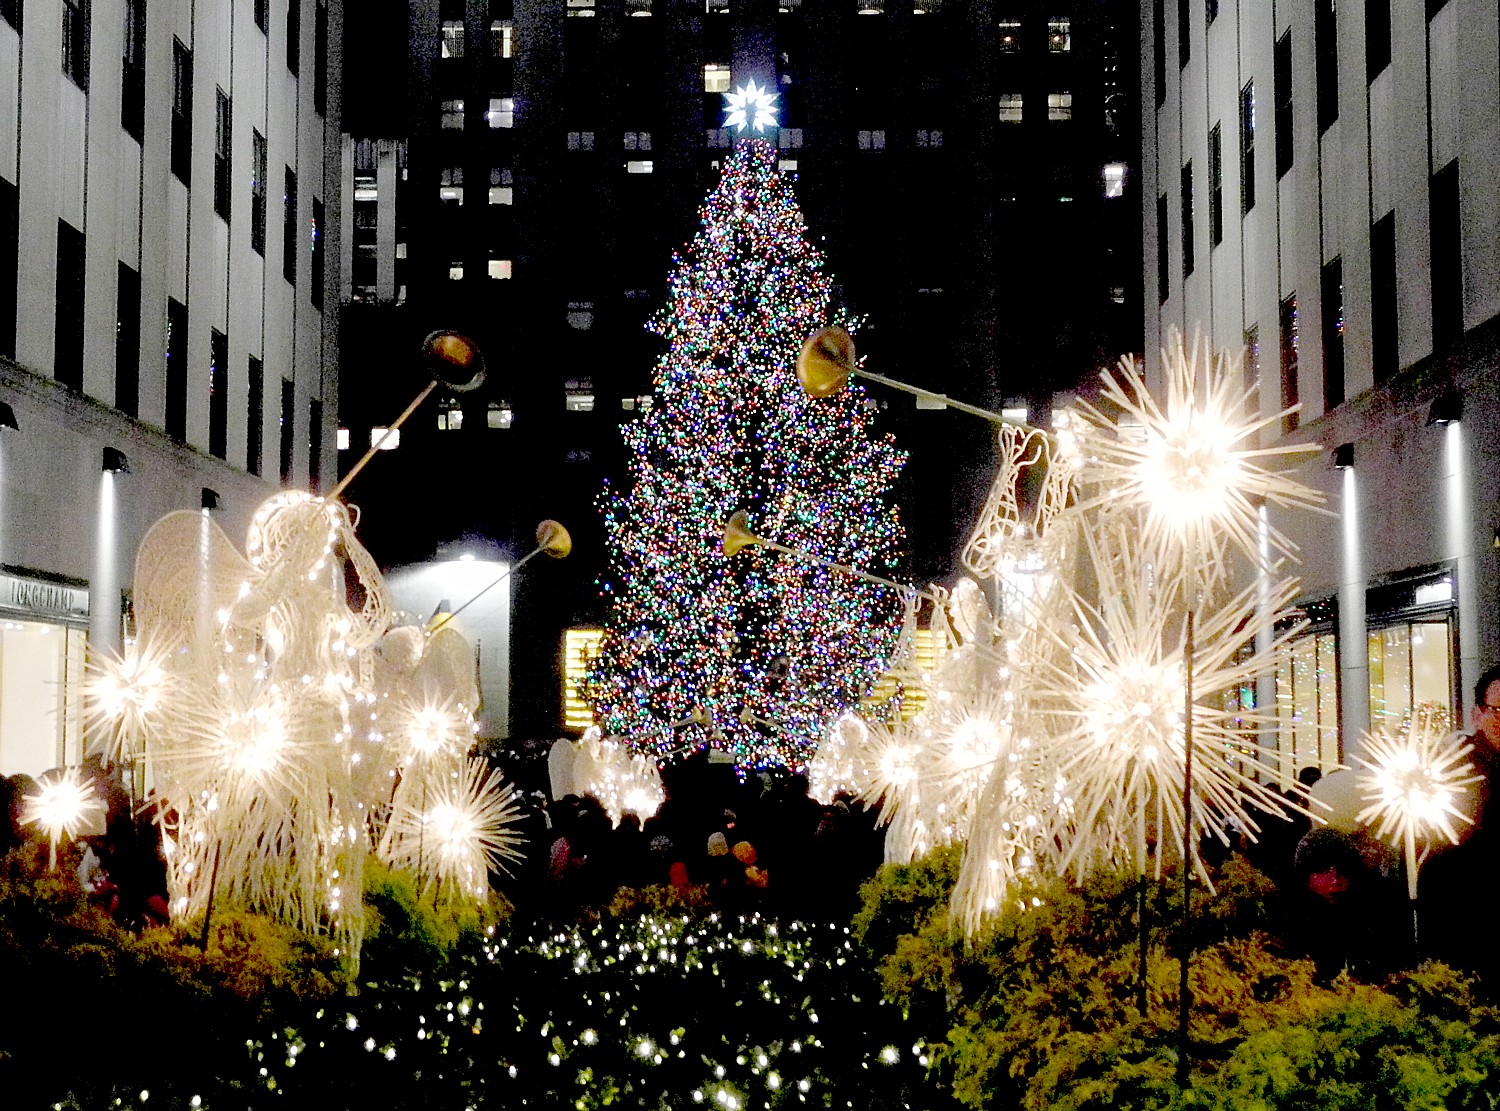 Louis Vuitton's 12-story Christmas tree on the Fifth Avenue is a modern  spectacle